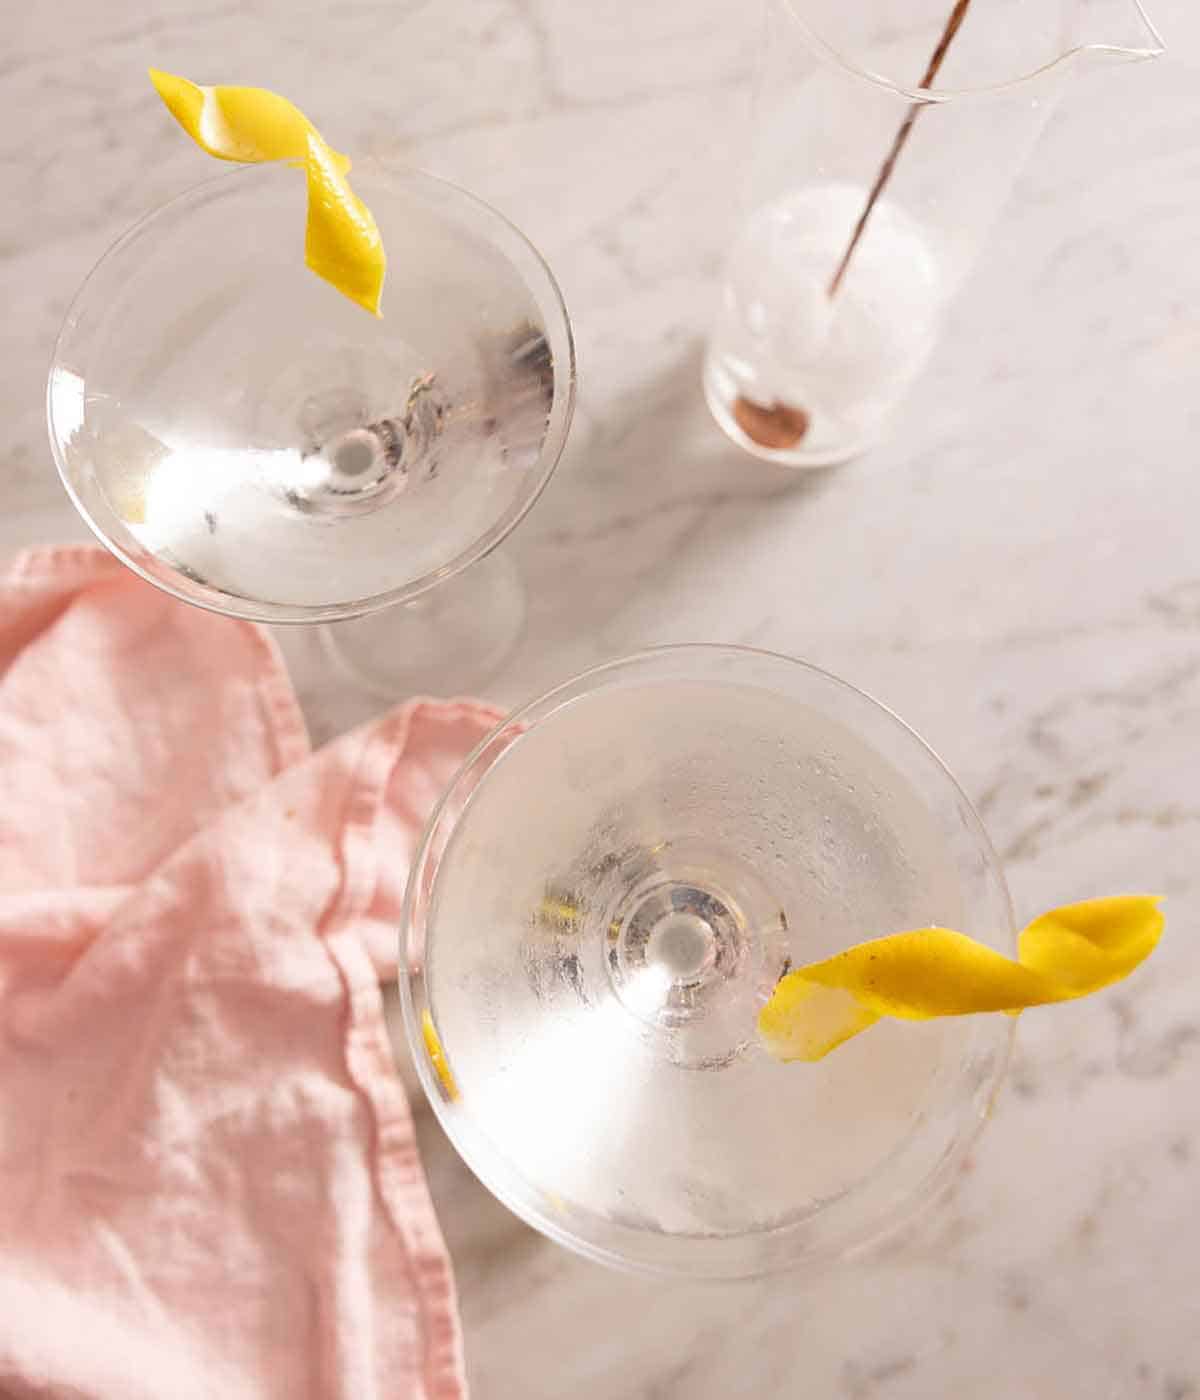 Overhead view of two glasses of martinis with lemon garnishes.